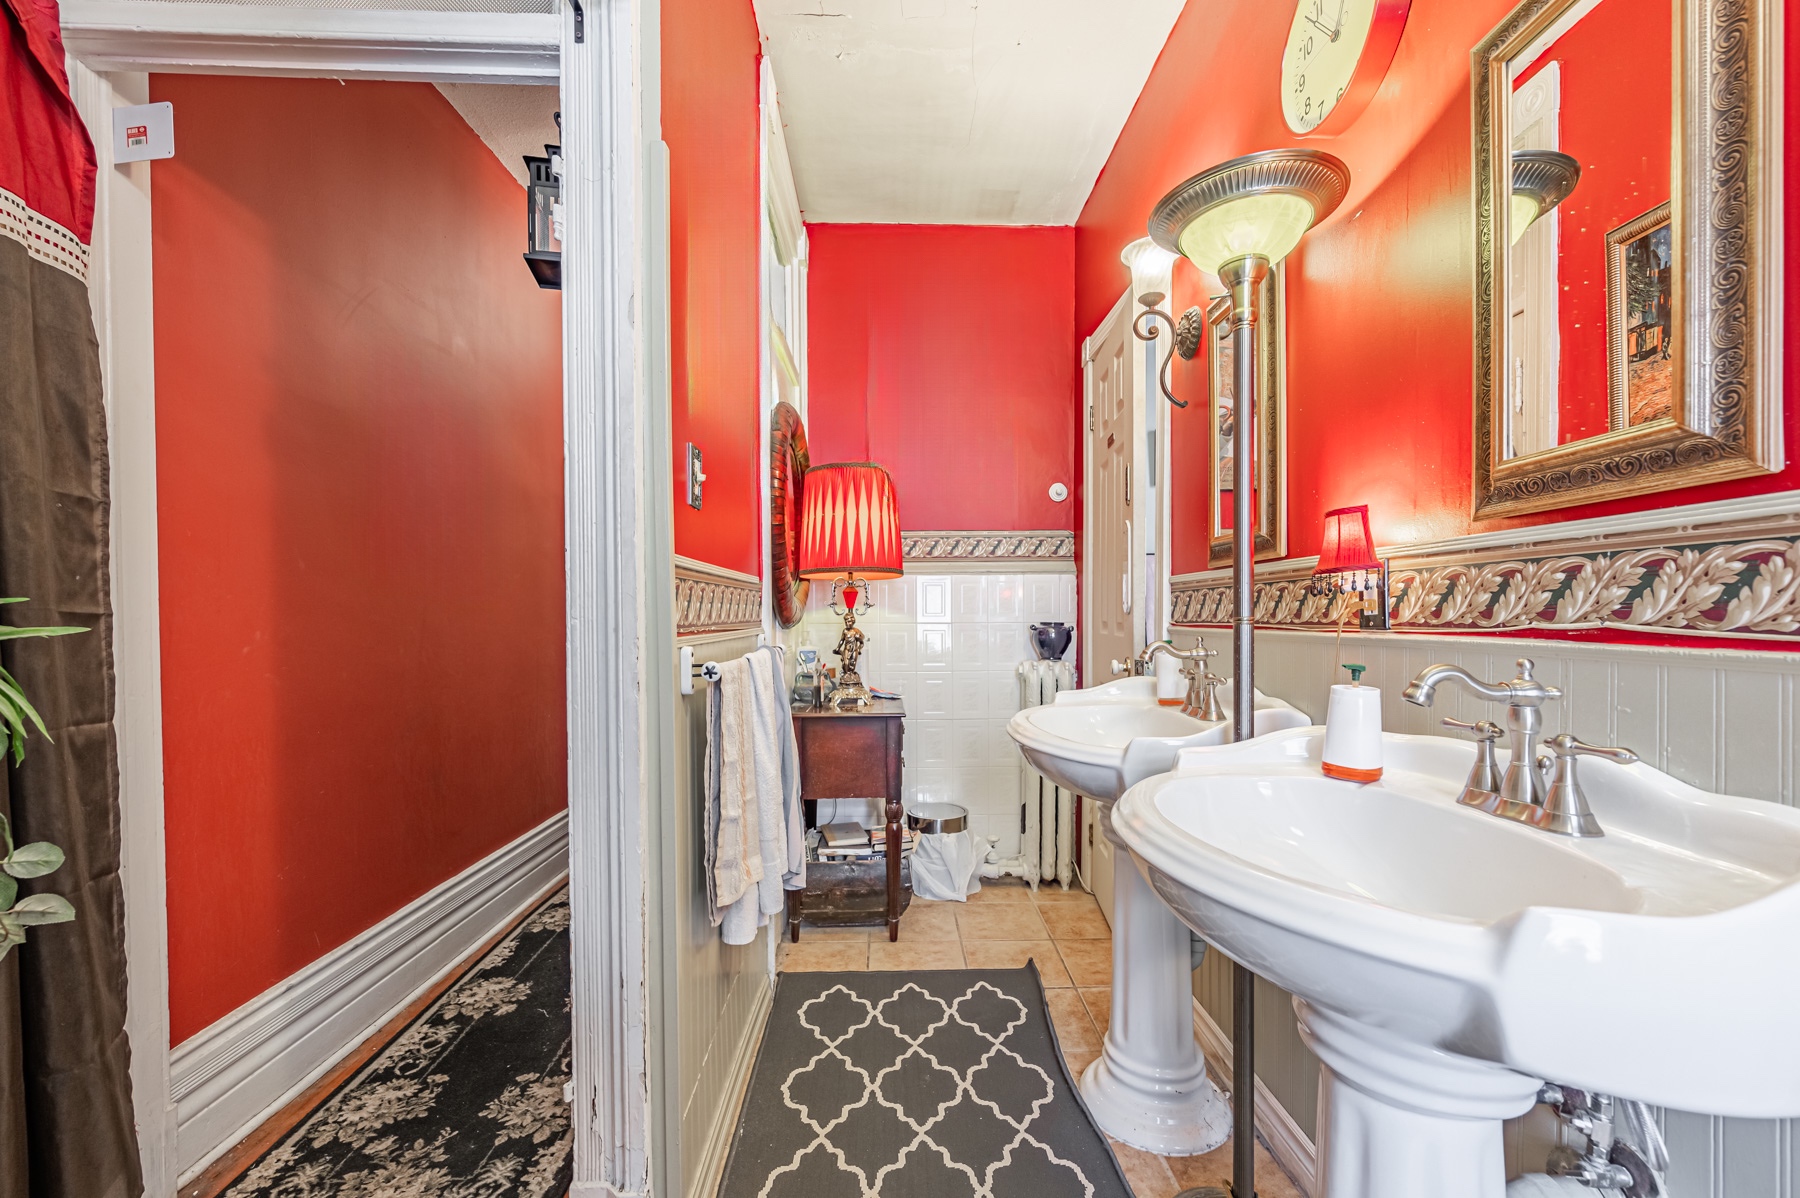 Bathroom with two sinks and vivid red walls – 74 Homewood Ave.